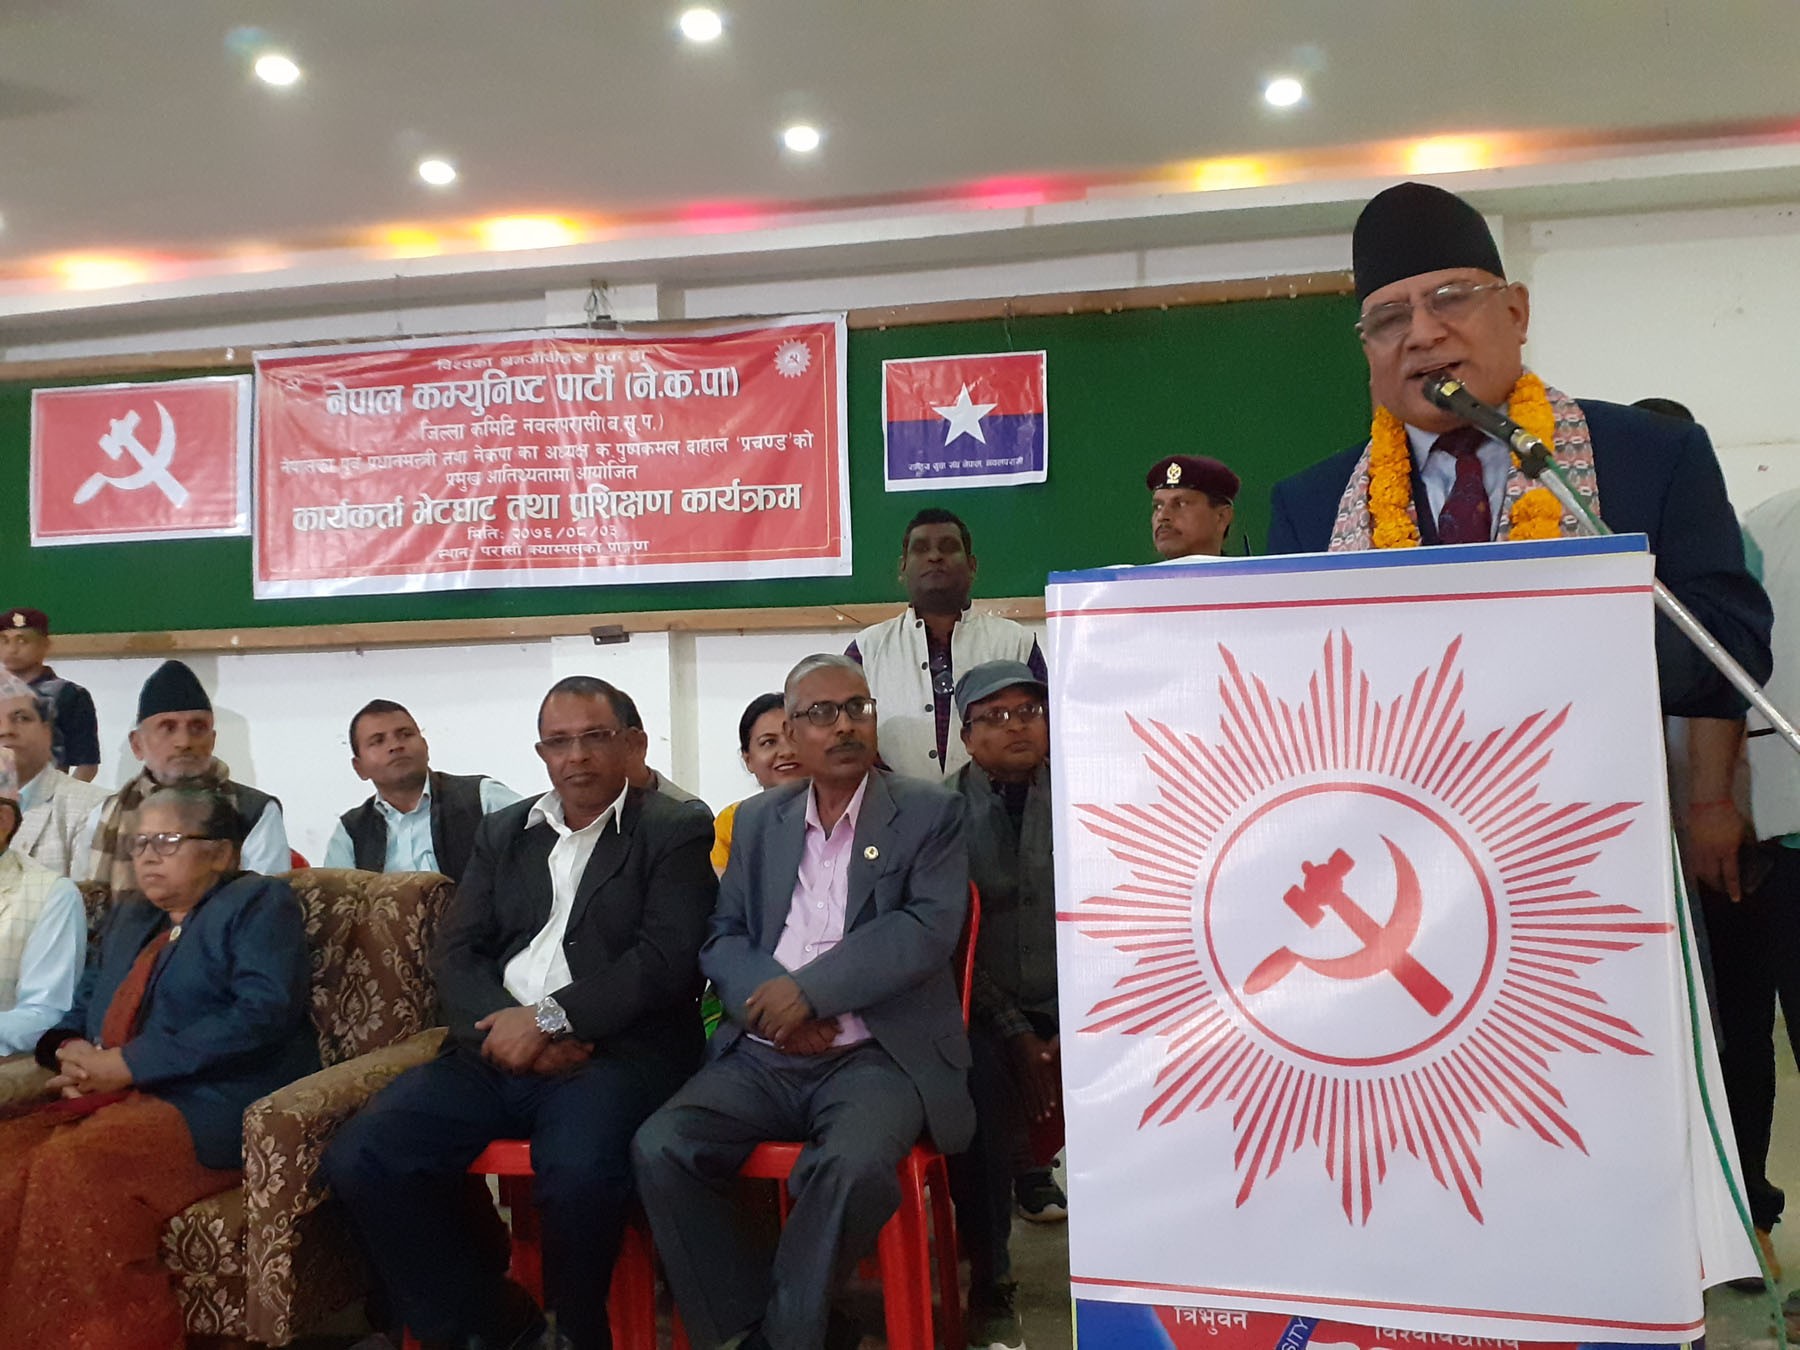 ncp-will-build-a-prosperous-nepal-chair-dahal